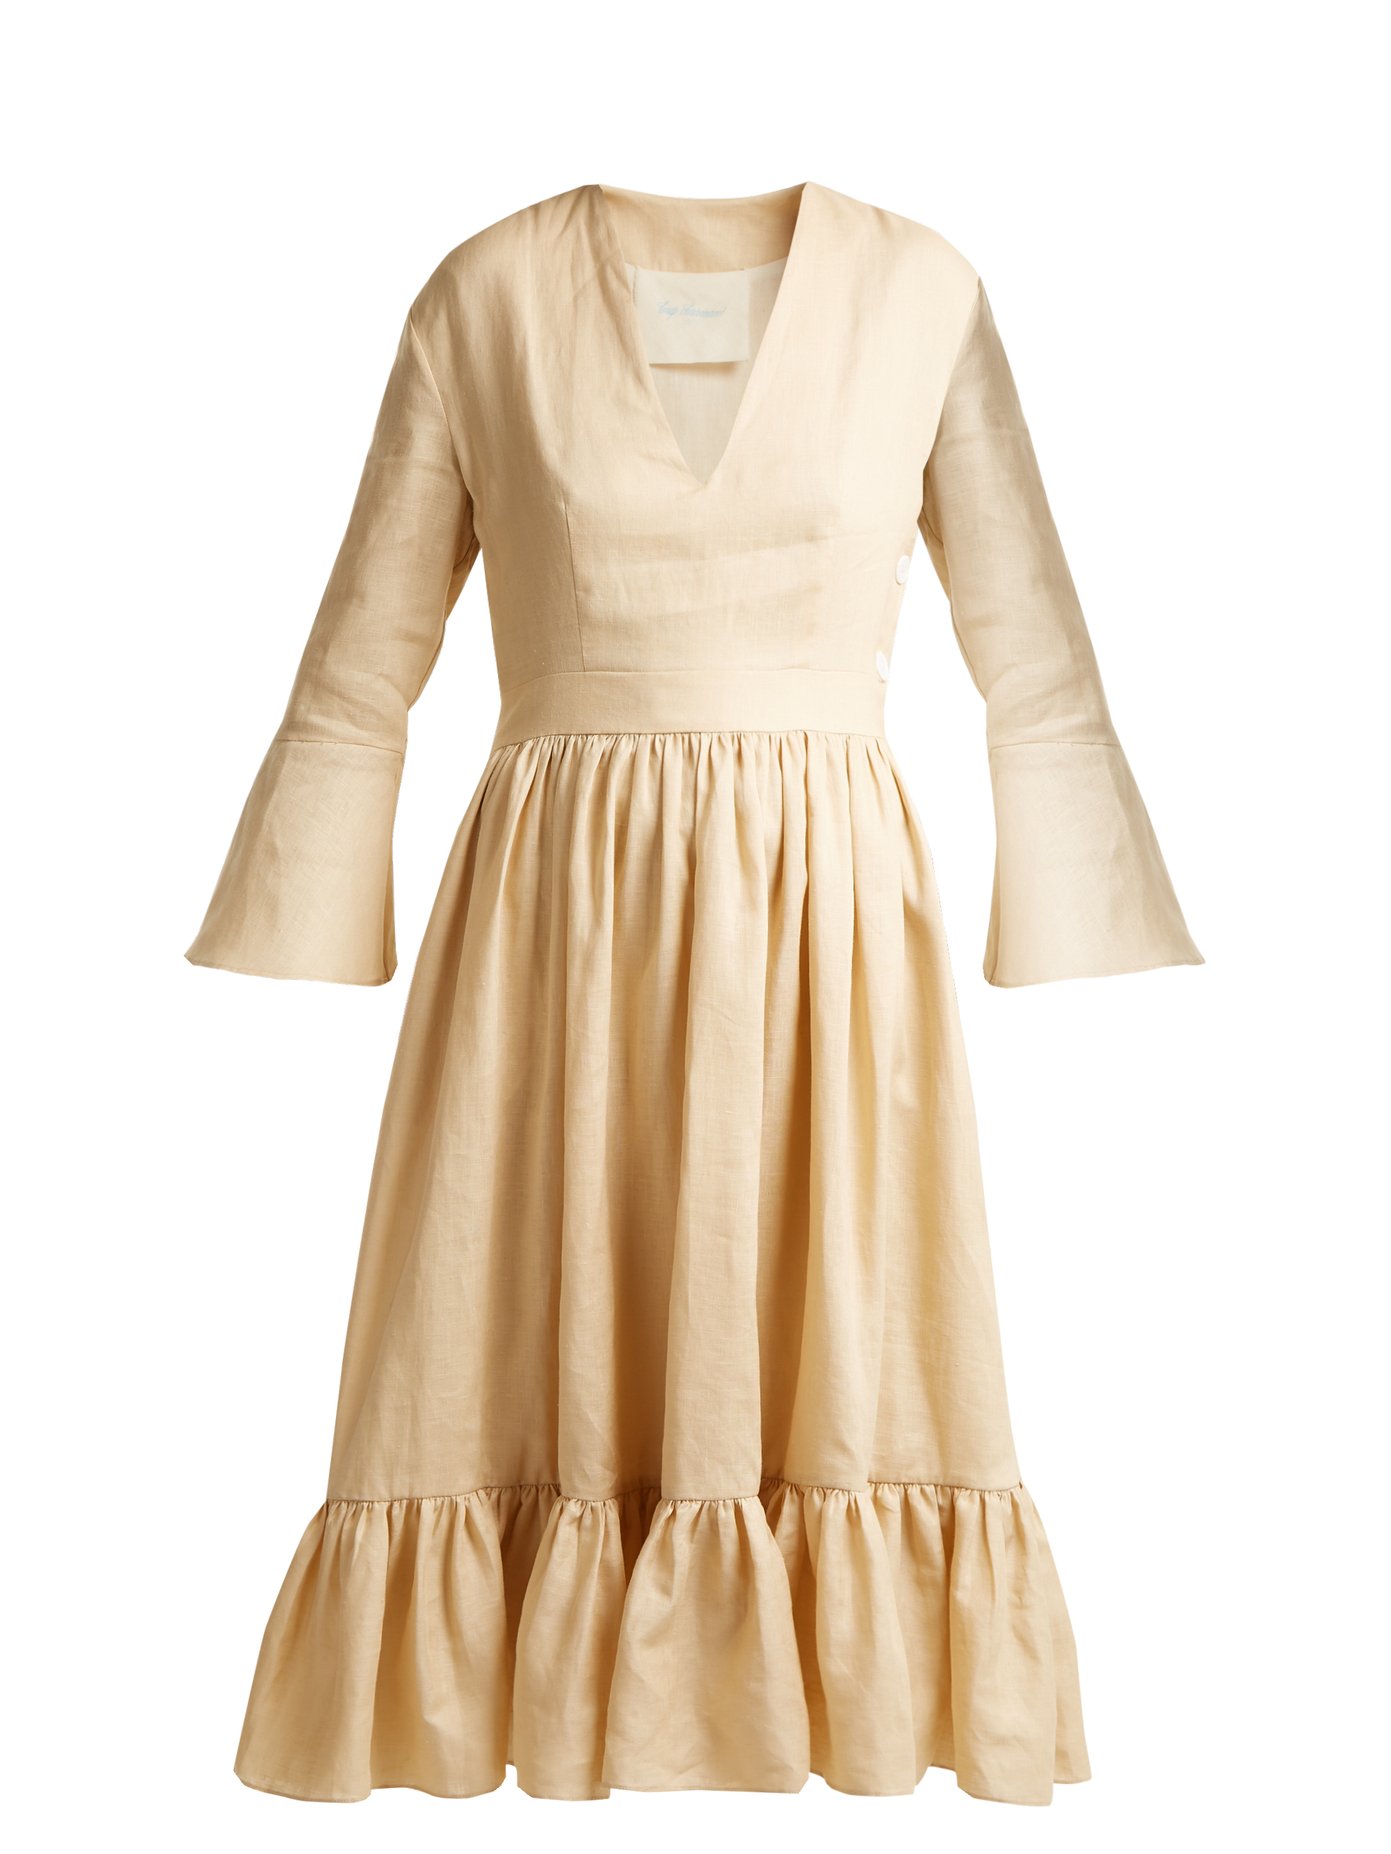 linen dress with sleeves uk